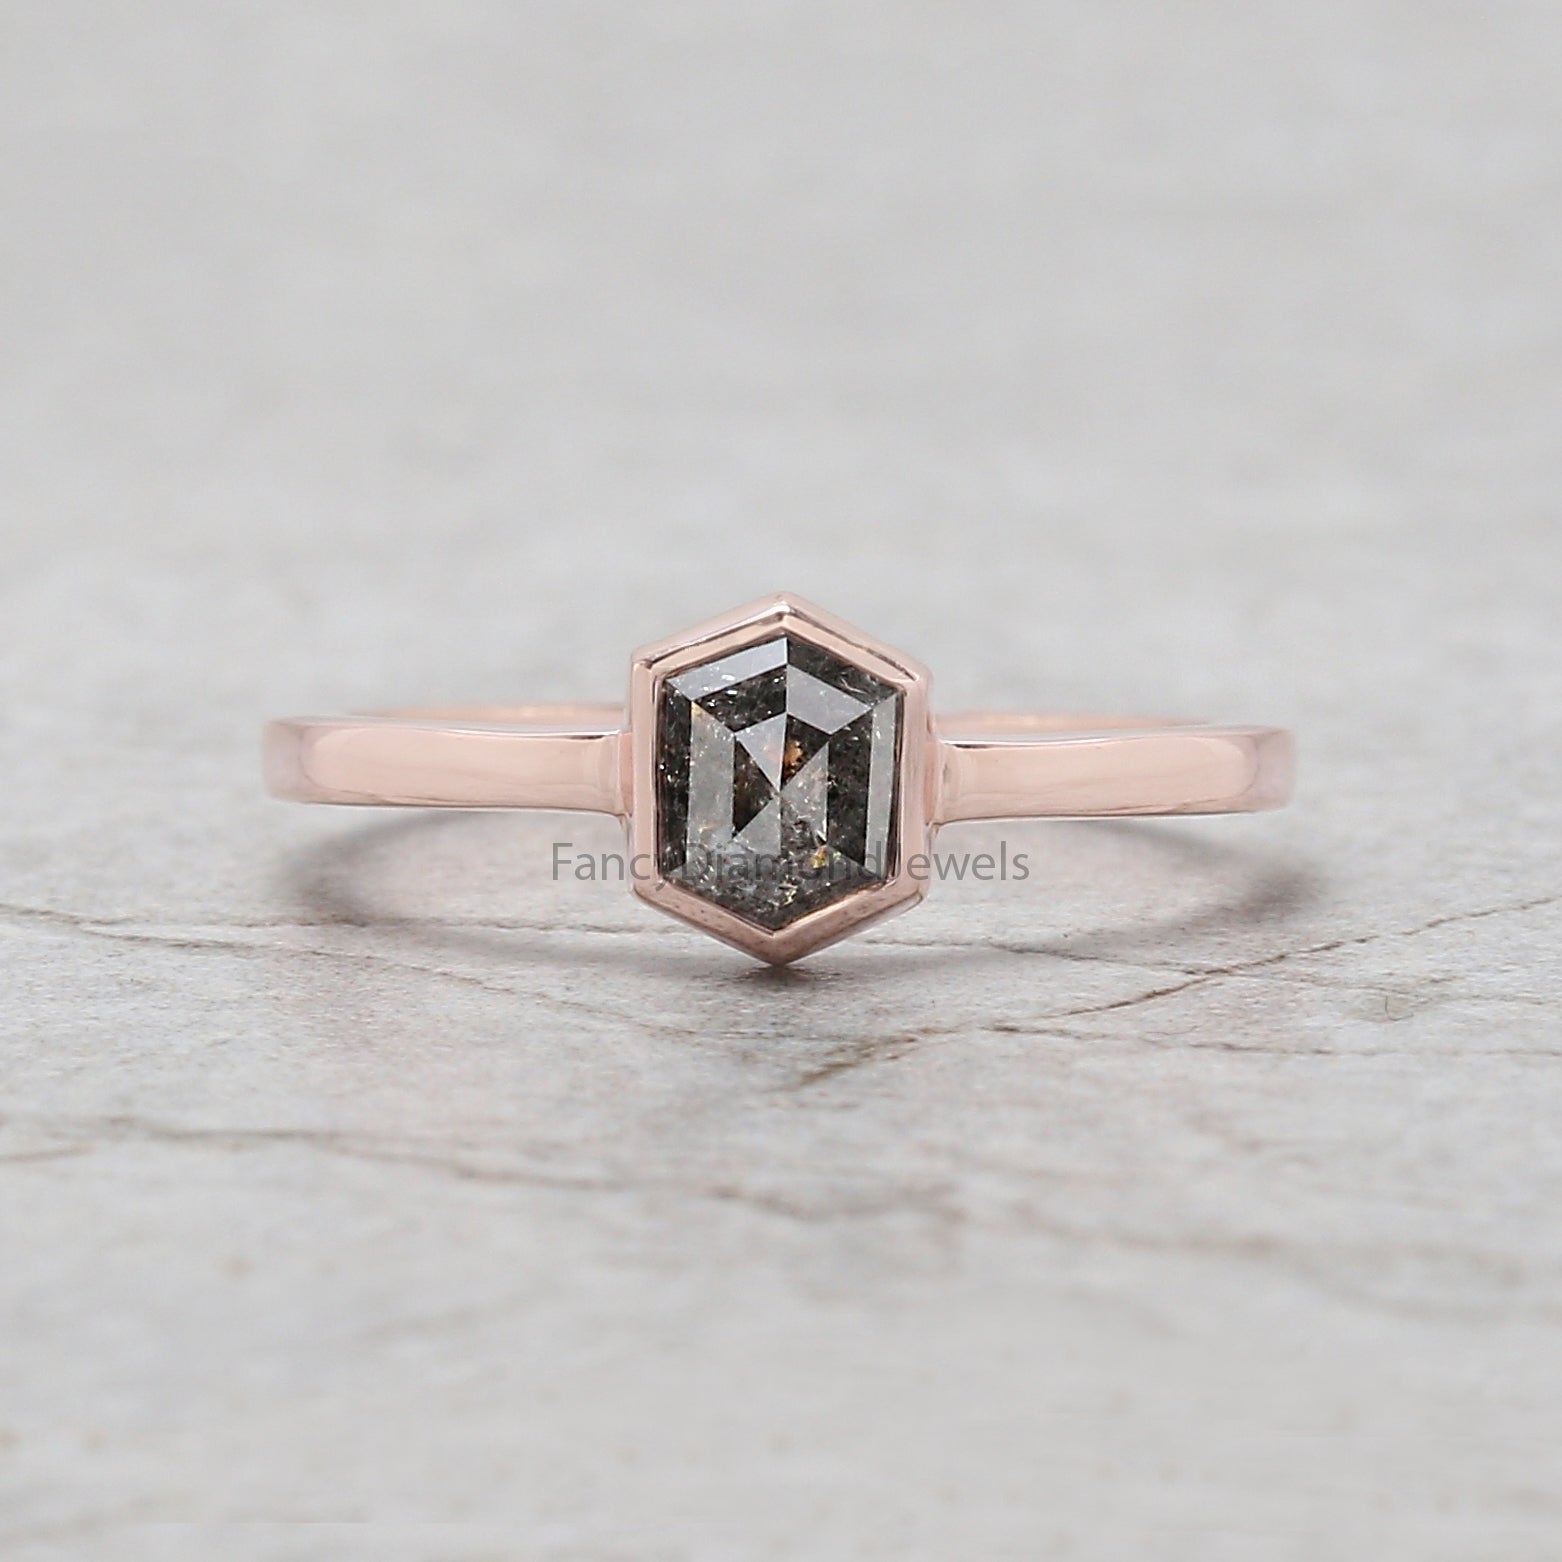 Hexagon Cut Salt And Pepper Diamond Ring 0.76 Ct 5.96 MM Hexagon Diamond Ring 14K Solid Rose Gold Silver Engagement Ring Gift For Her QN2187